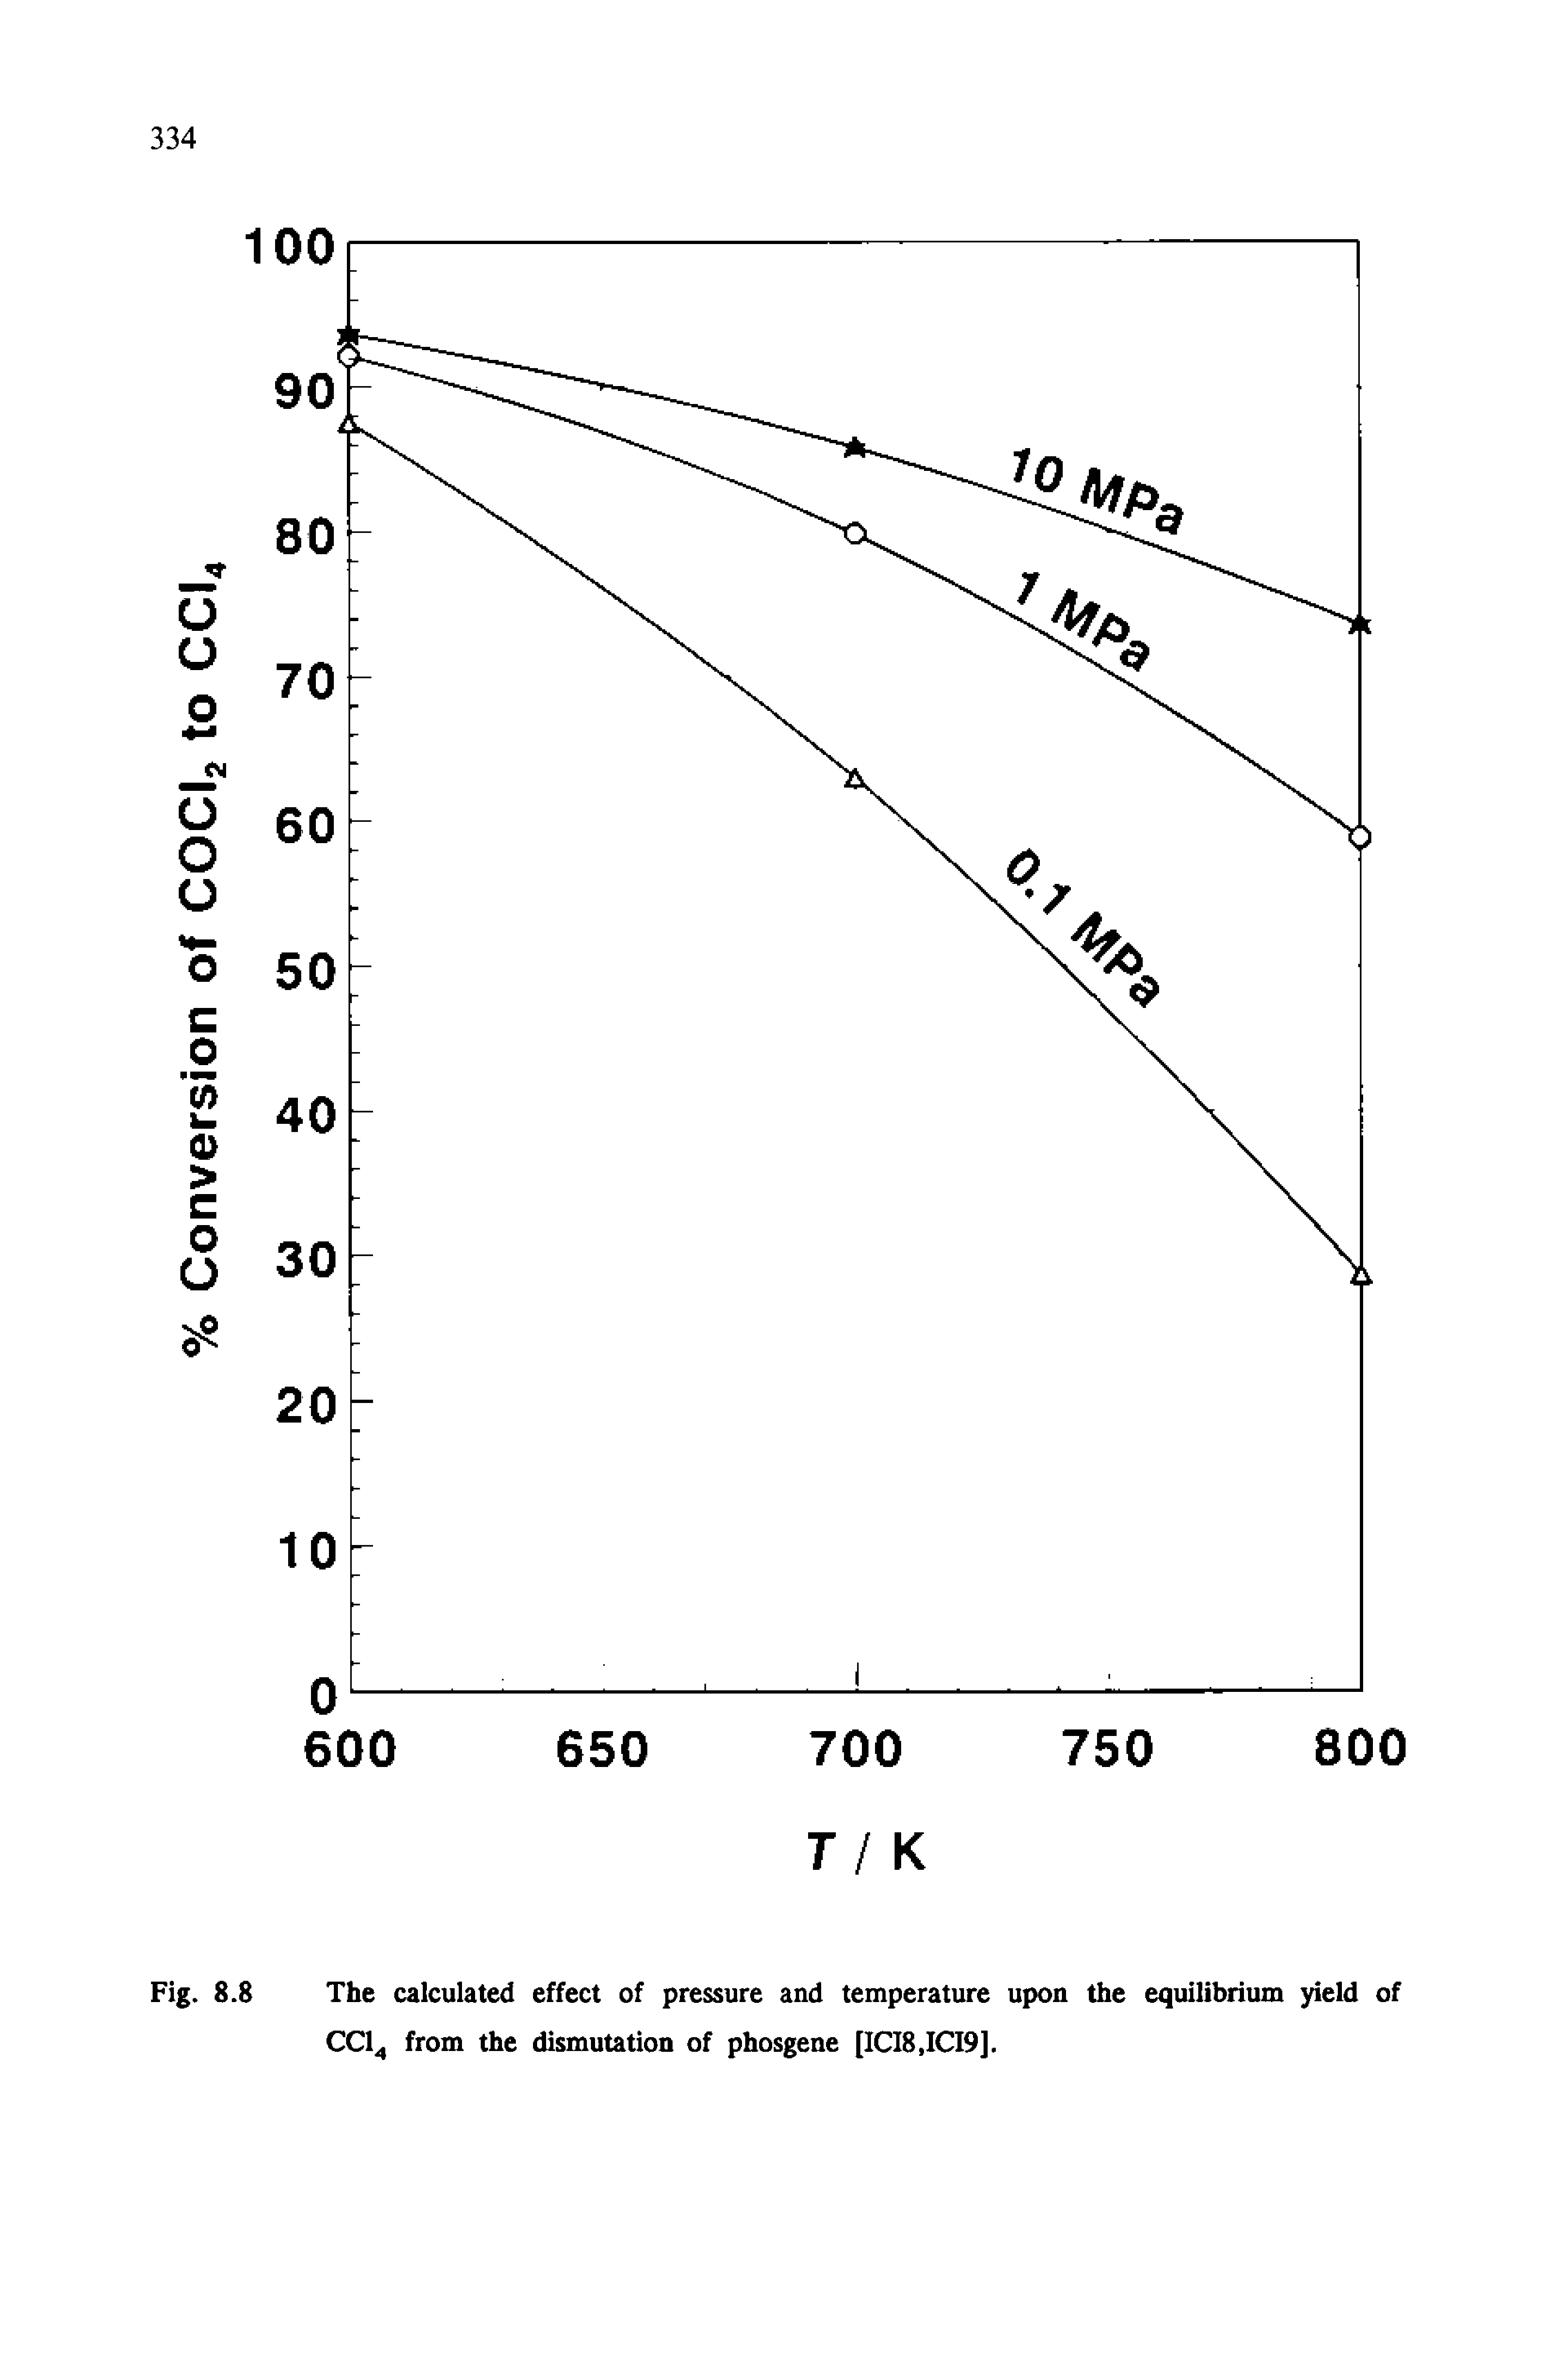 Fig. 8.8 The calculated effect of pressure and temperature upon the equilibrium yield of CCI4 from the dismutation of phosgene [ICI8,ICI9].